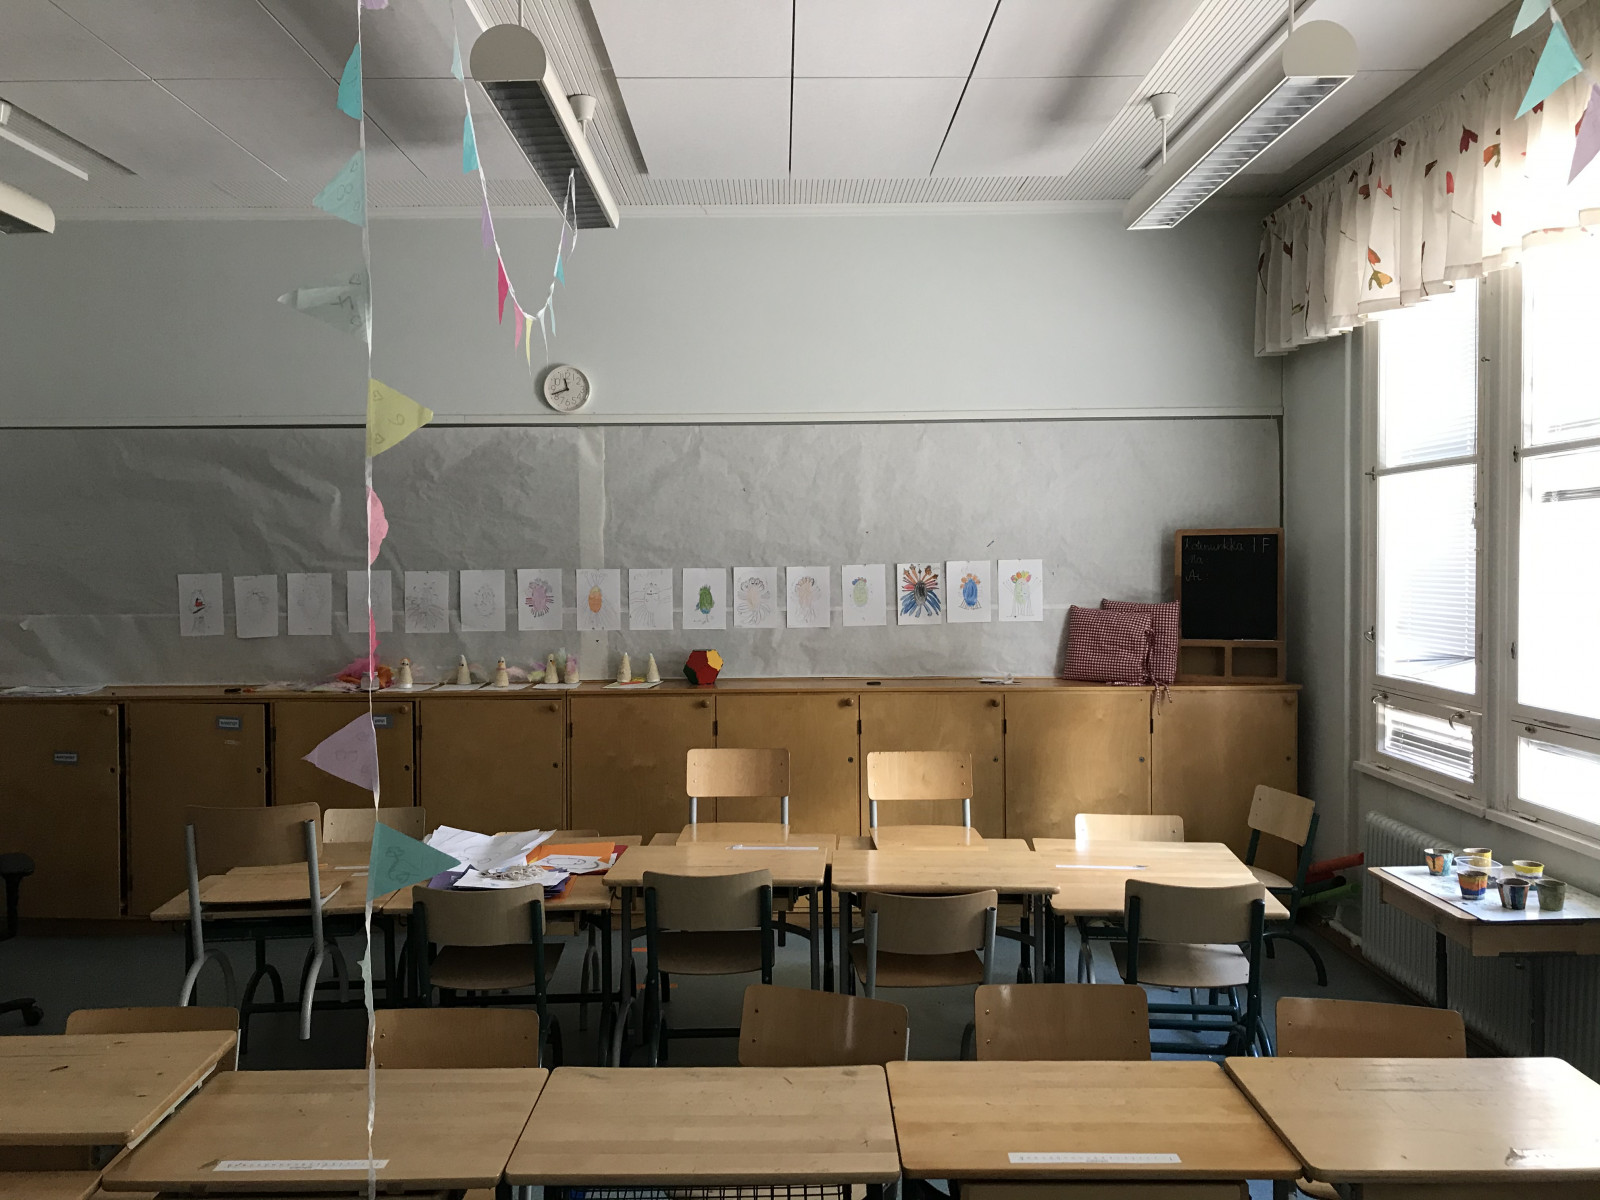 An empty classroom. There are decorations like streamers and pictures around.